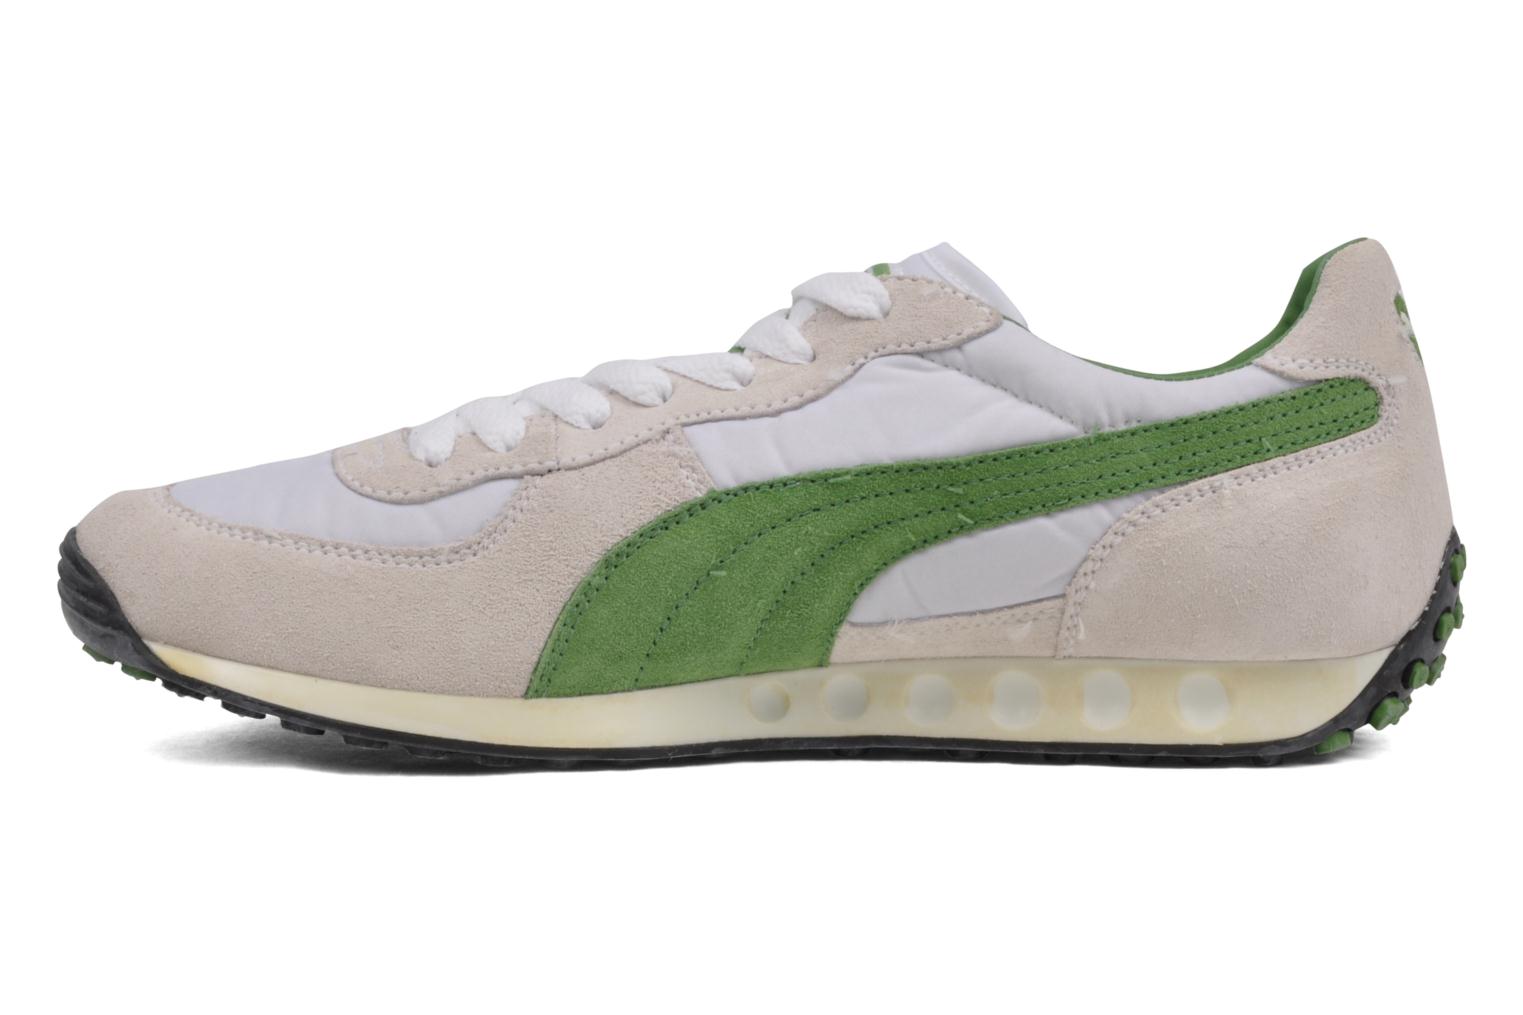 Puma Easy Rider Iii Wash Trainers in White at Sarenza.co.uk (34805)